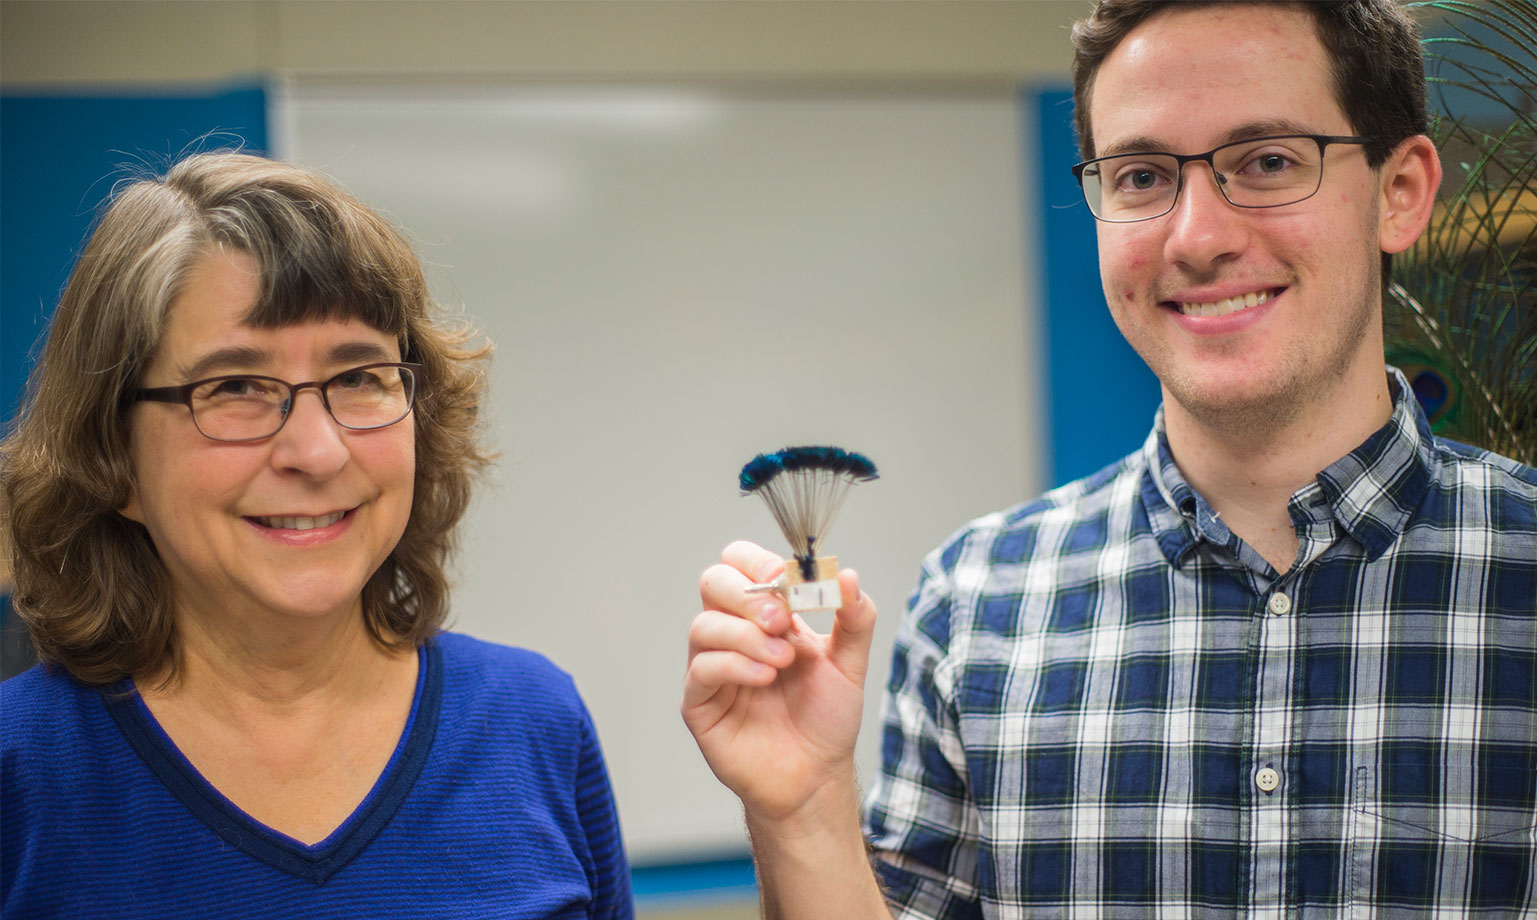 Suzanne Amador Kane and Daniel Van Beveren pose with one of their robotic feathers from their experiment.